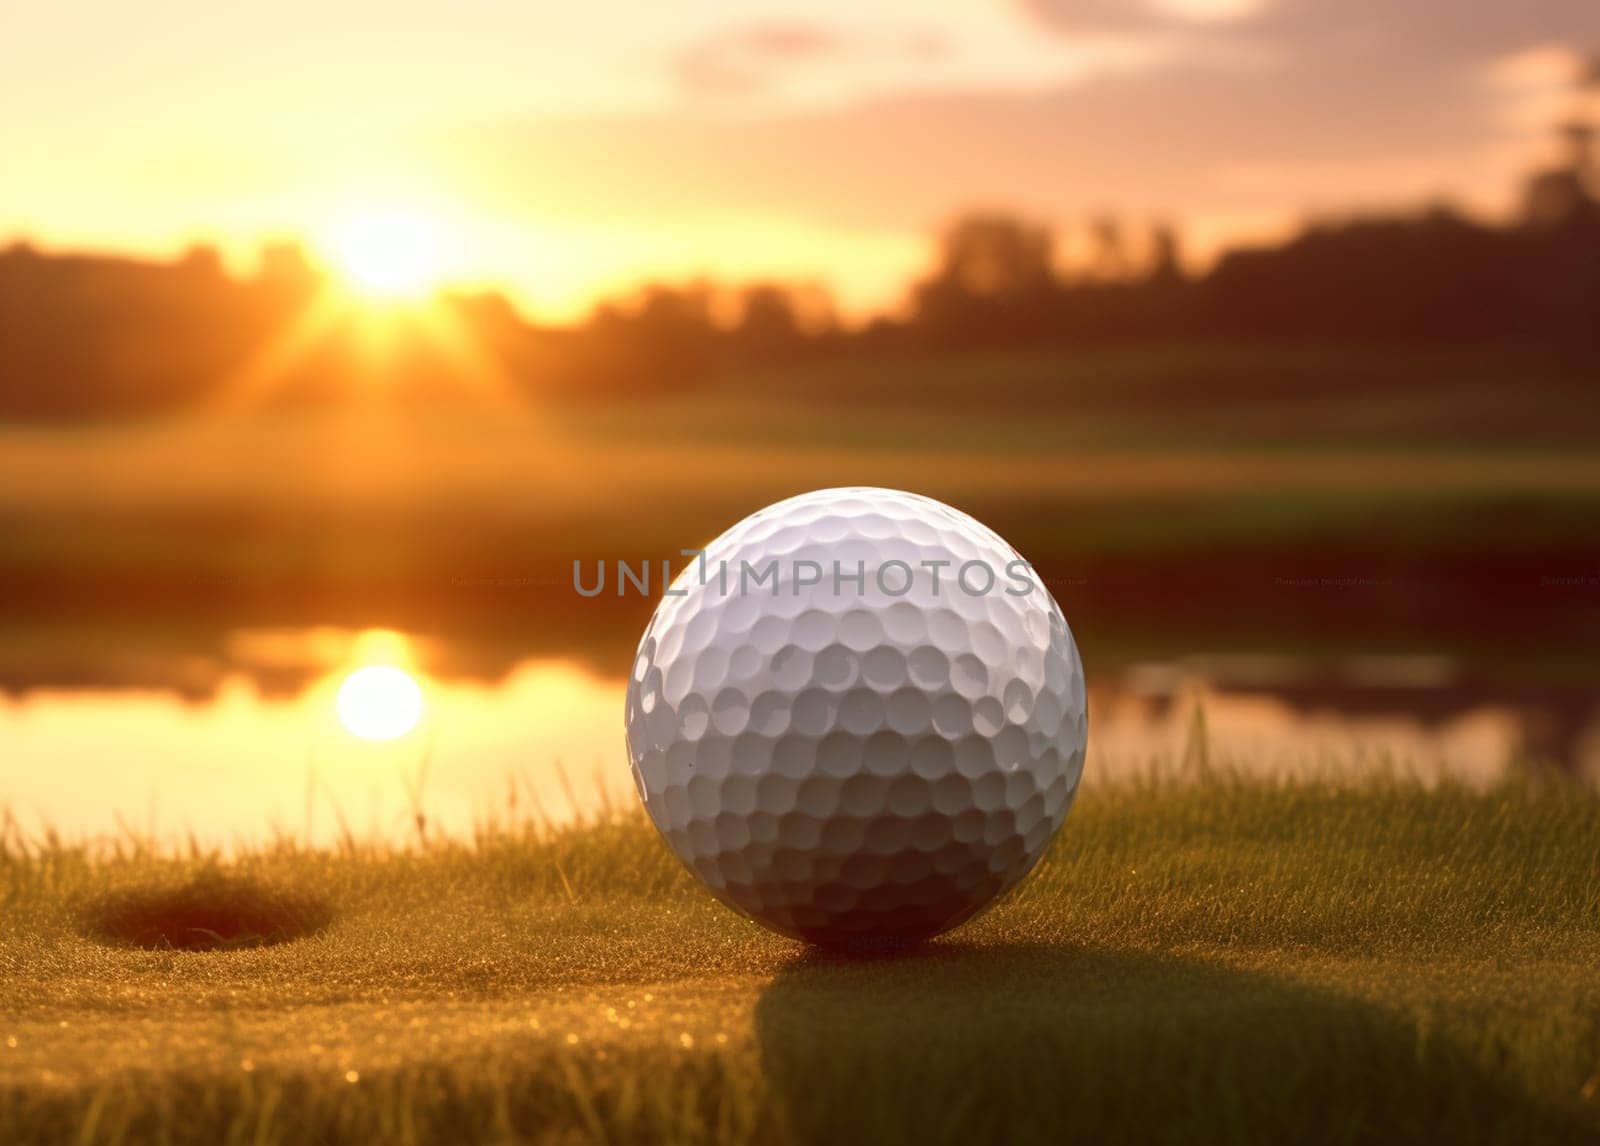 The white golf ball is positioned in a high green grass, one of the obstacles to golf. High quality photo